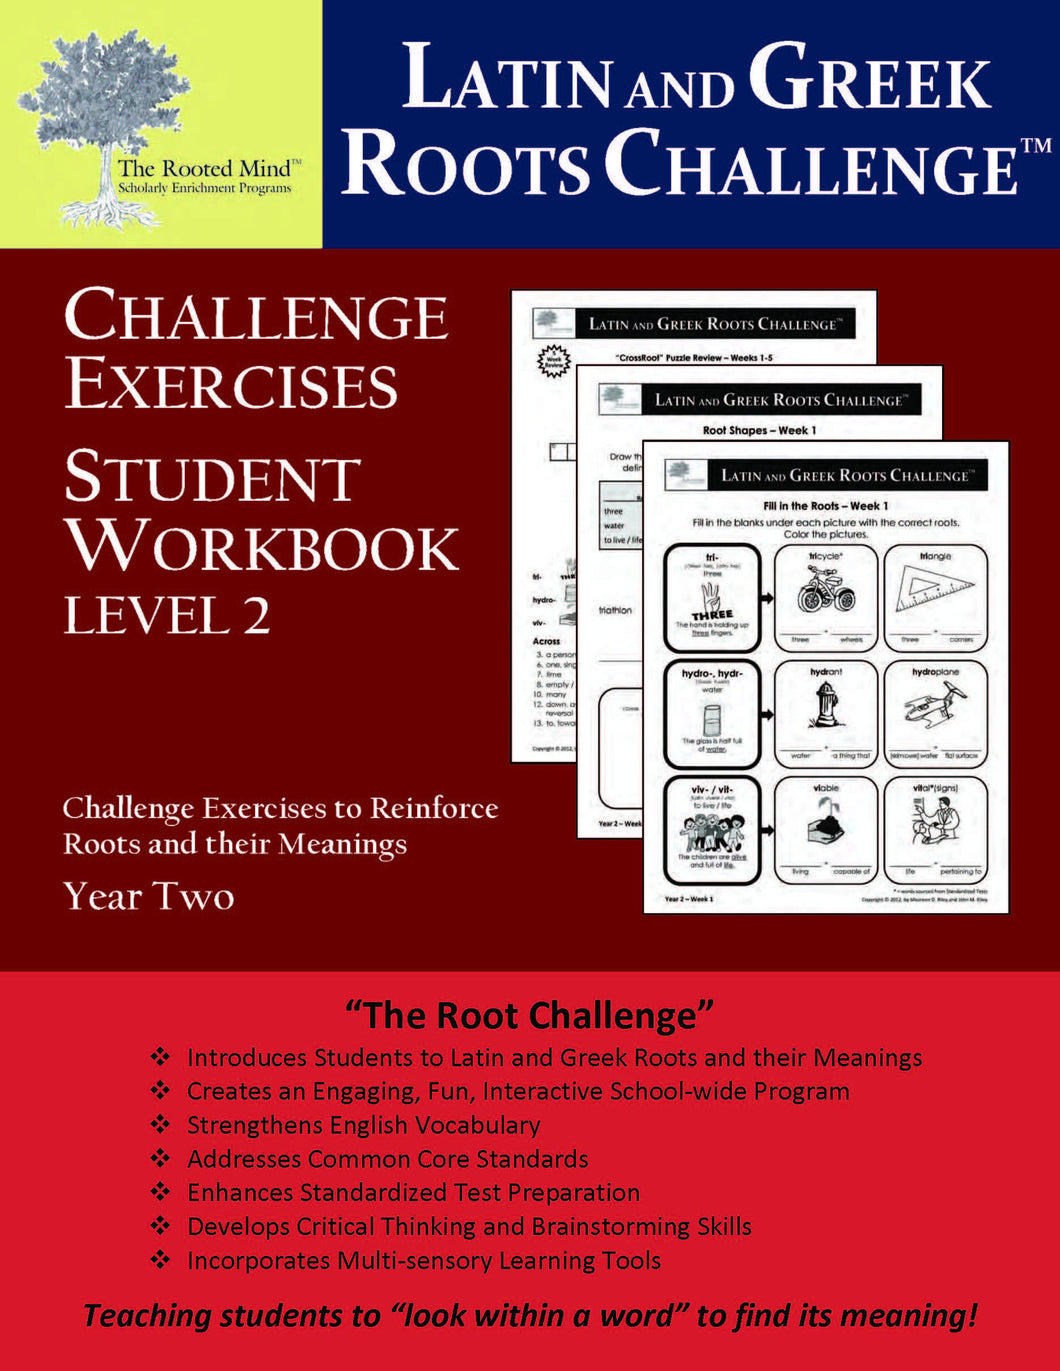 Latin and Greek Roots Challenge - Year 2 - Level 2 Student Workbook